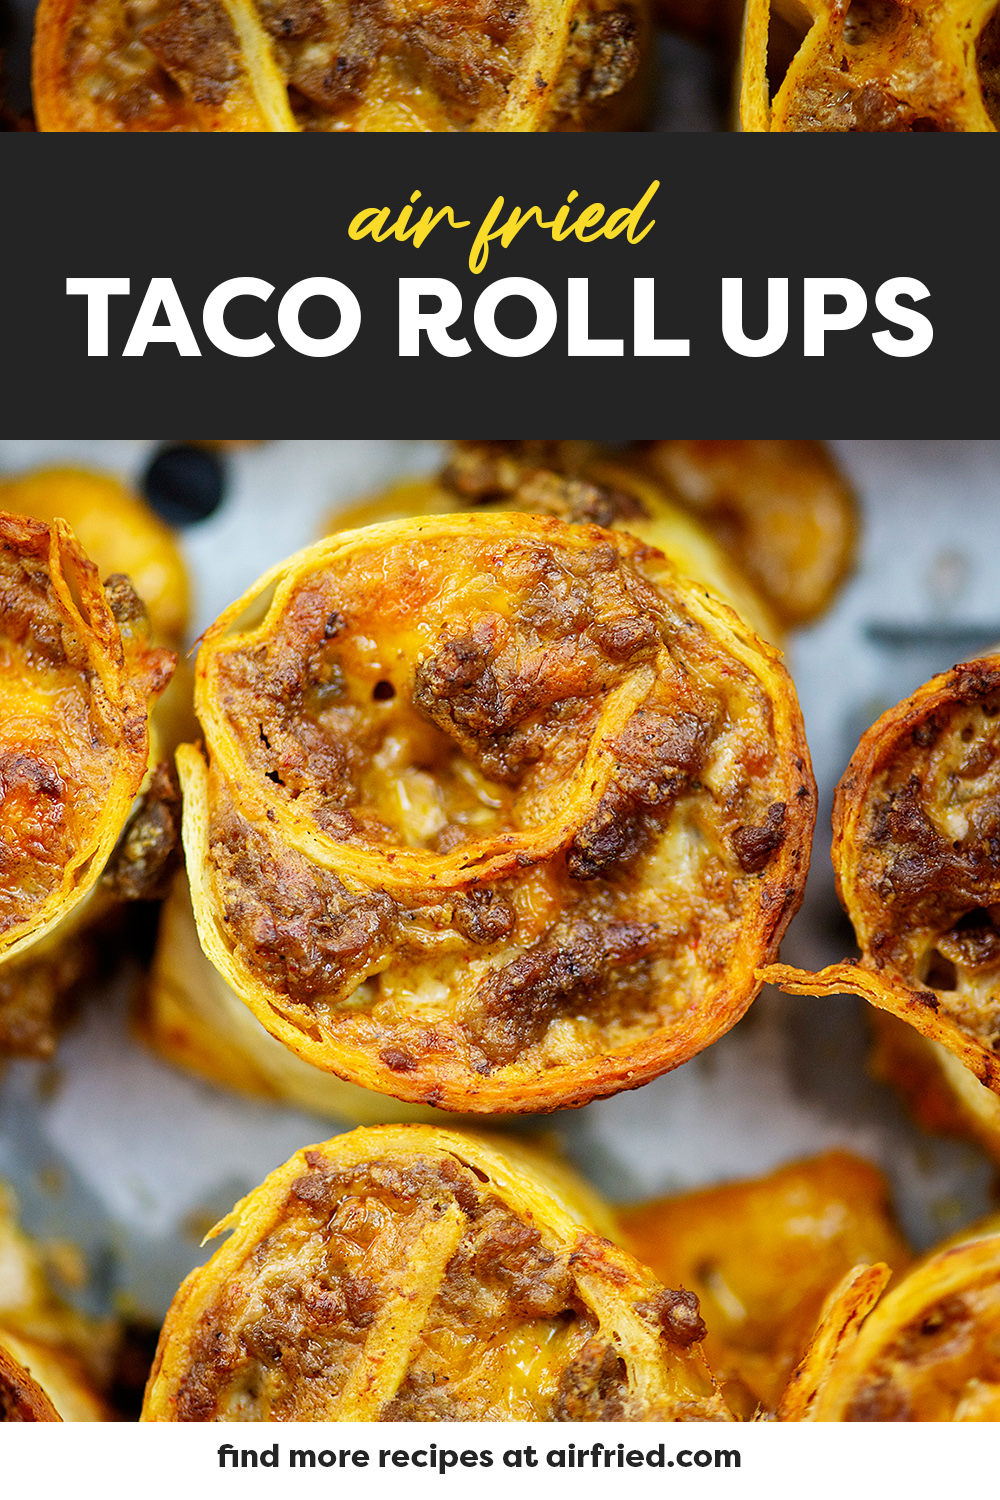 These Cheesy Taco Pinwheels are made with seasoned ground beef and a creamy, cheesy filling all rolled up in a tortilla and air fried! They're a great way to use up leftover taco meat and they're perfect for party appetizers too!